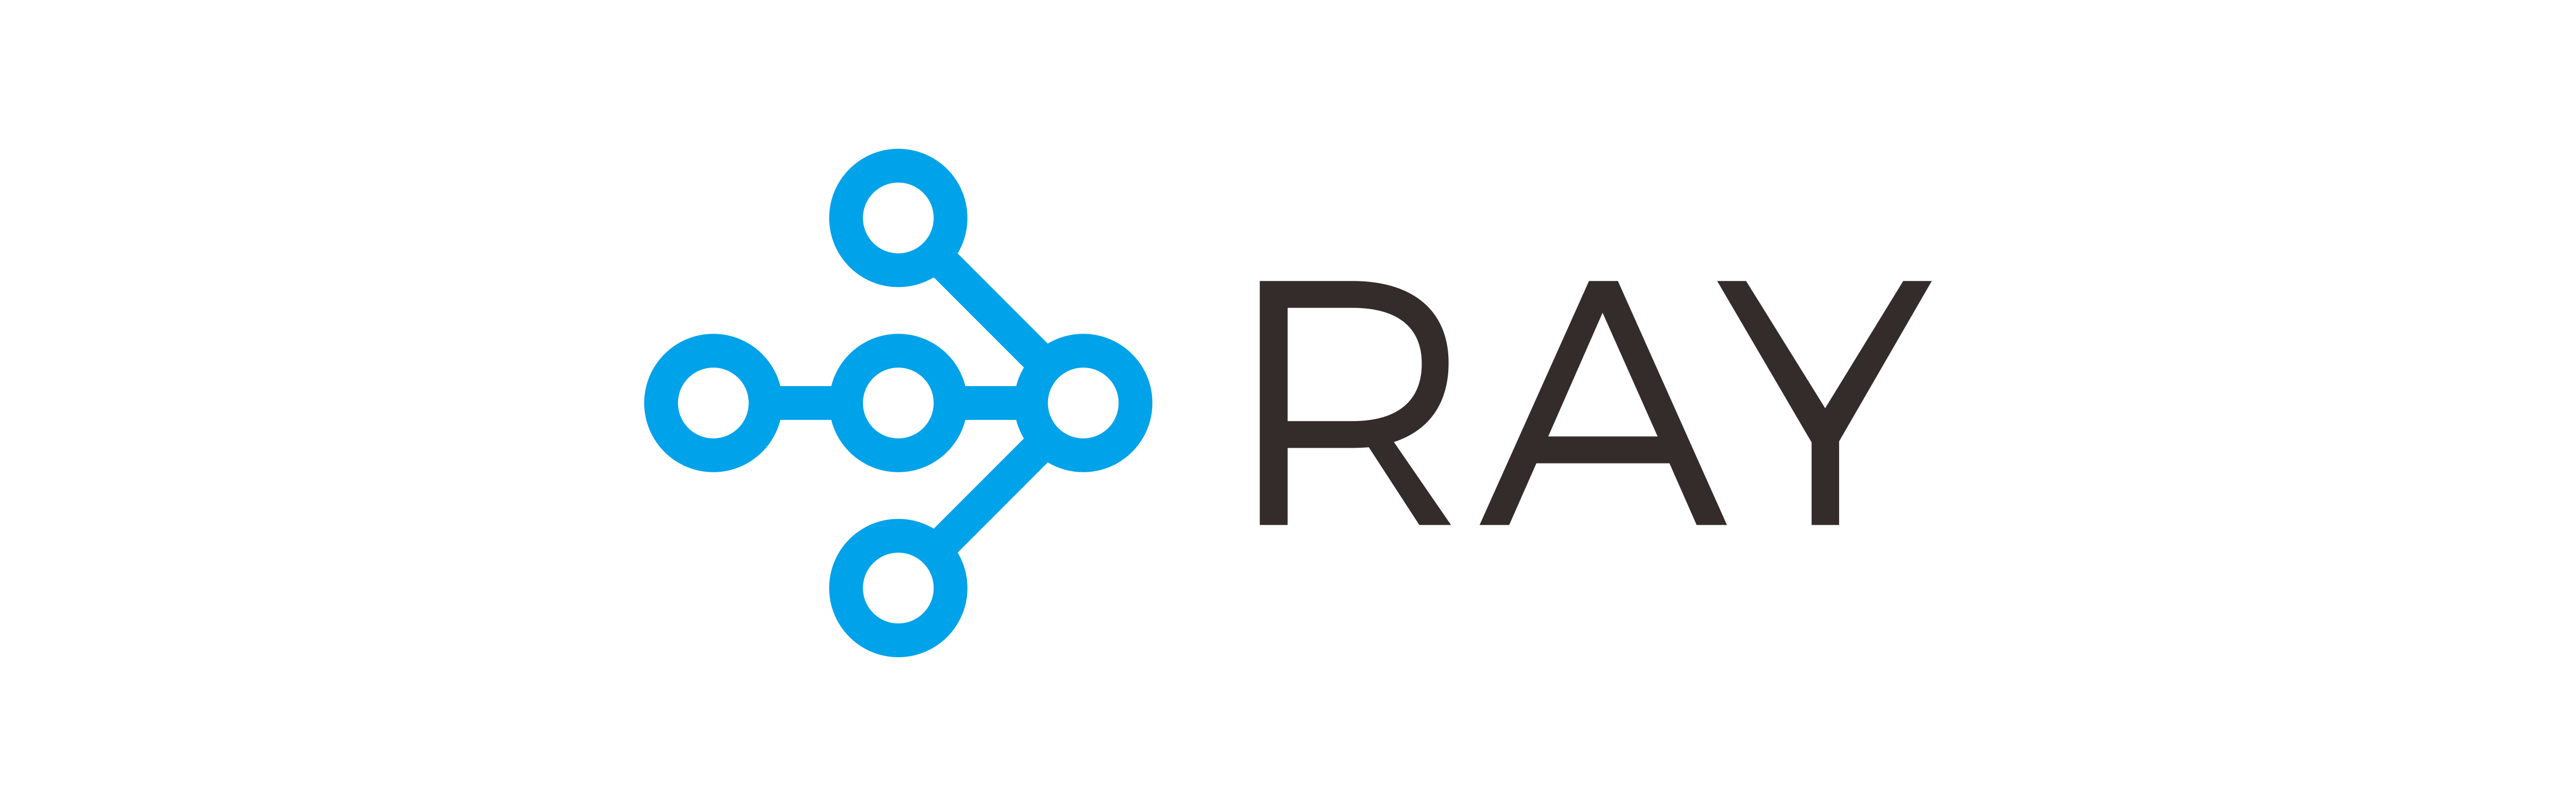 https://github.com/ray-project/ray/raw/master/doc/source/images/ray_header_logo.png